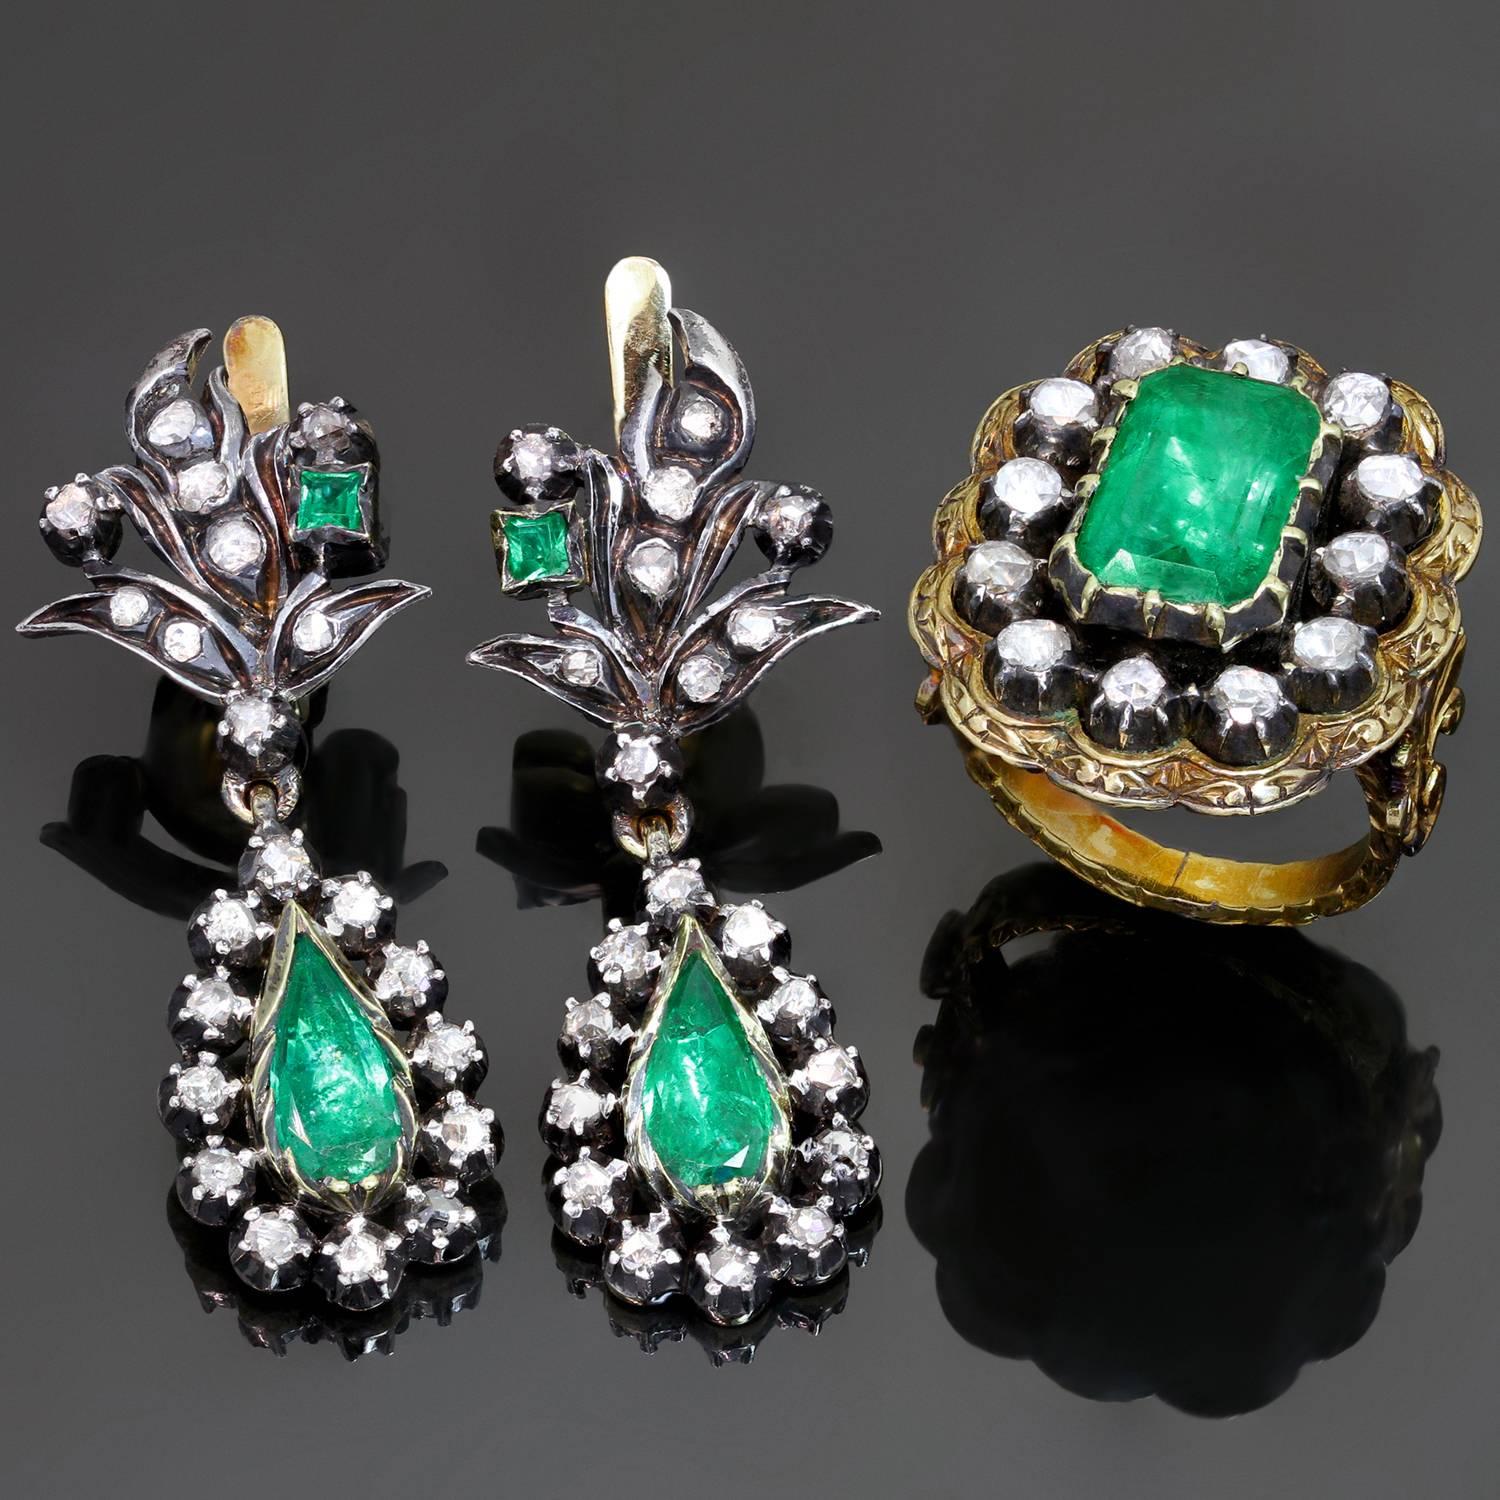 This impressive  foil-backed jewelry set consists of a hand-made filigree cocktail ring and pendant earrings crafted in silver-topped 18k yellow gold and set with 2 pear-cut, 2 square-cut, 1 emerald-cut foil-backed emeralds, and small rose-cut &